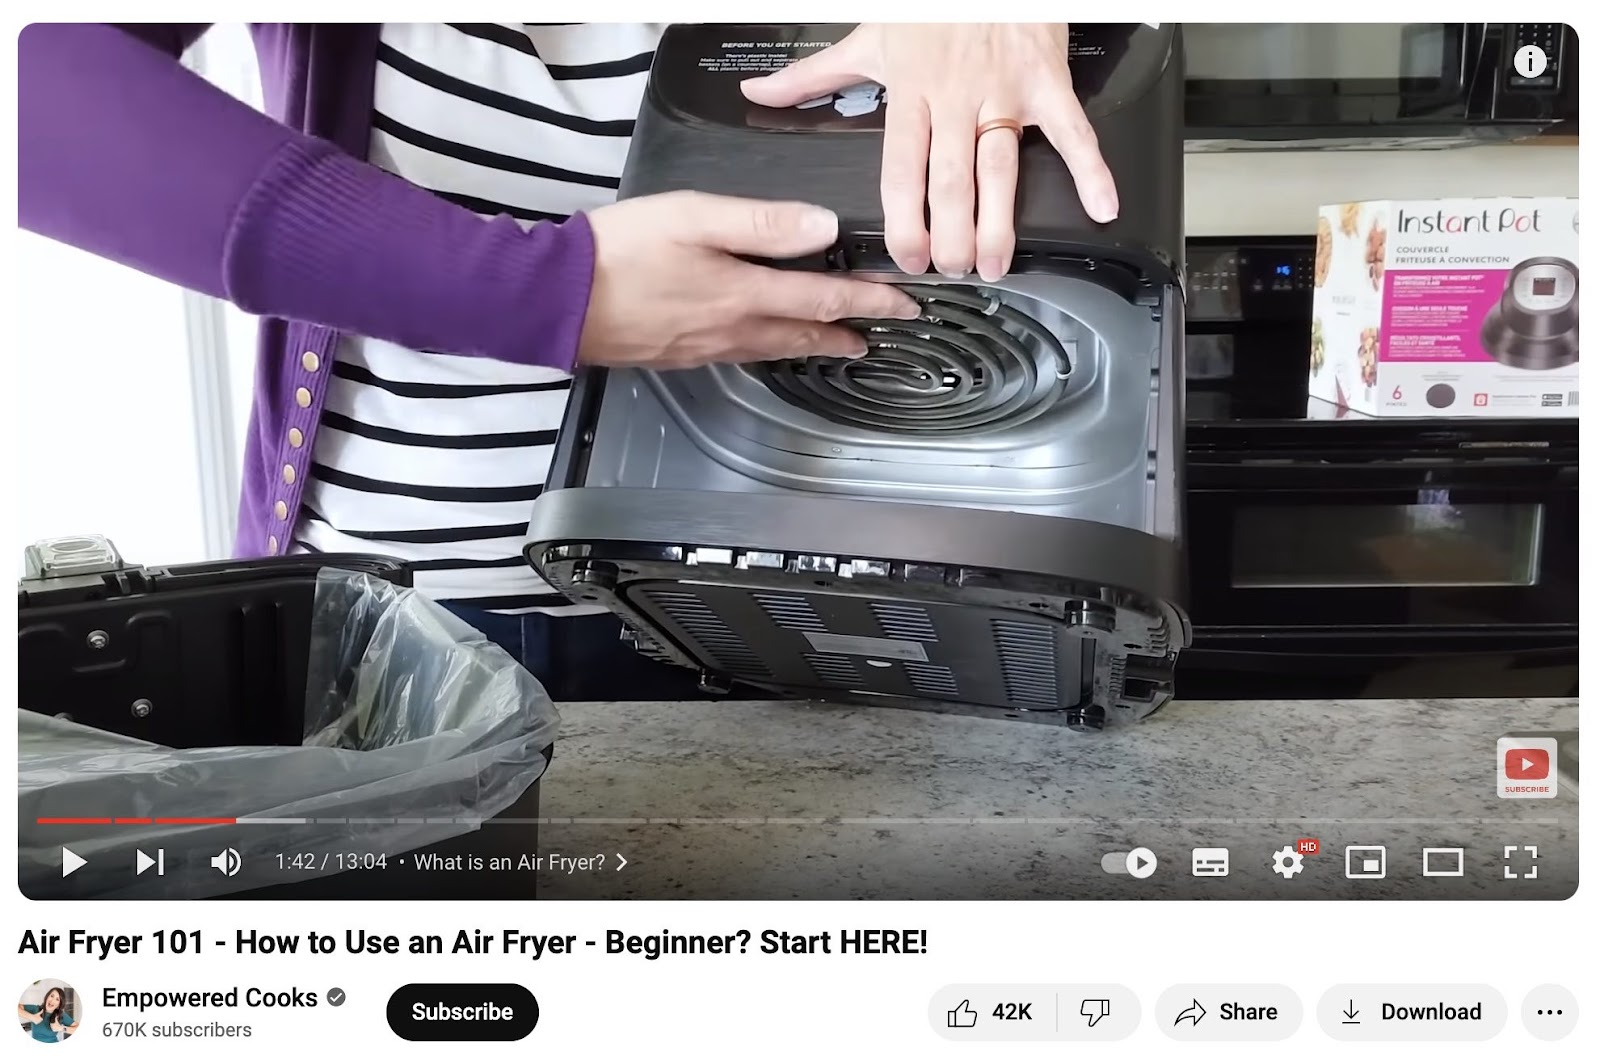 A video on YouTube showing users how to use an air fryer